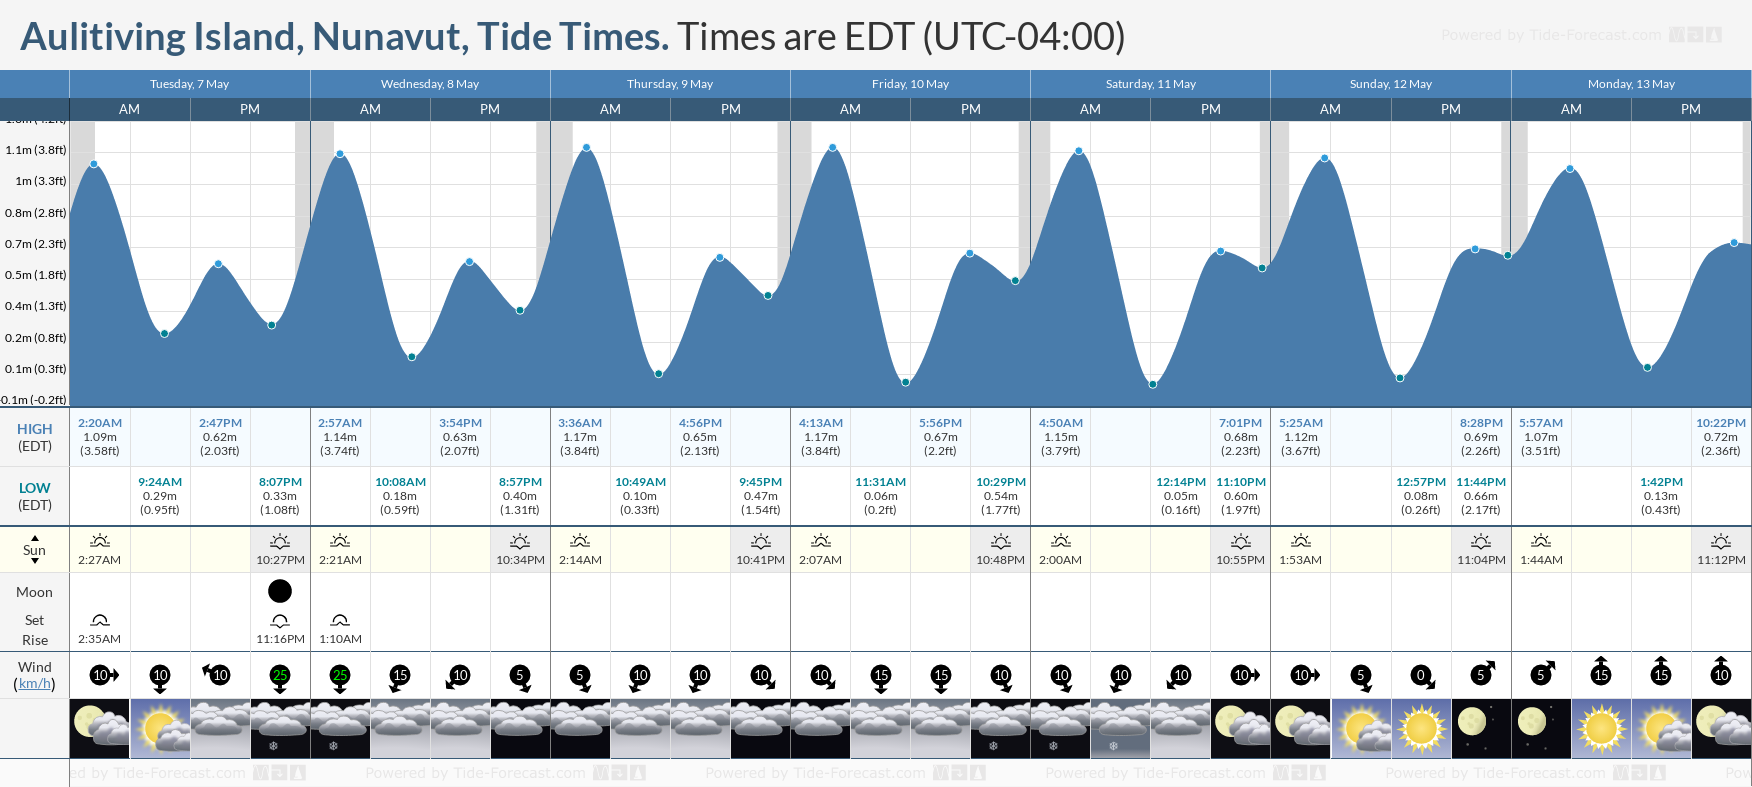 Aulitiving Island, Nunavut Tide Chart including high and low tide tide times for the next 7 days